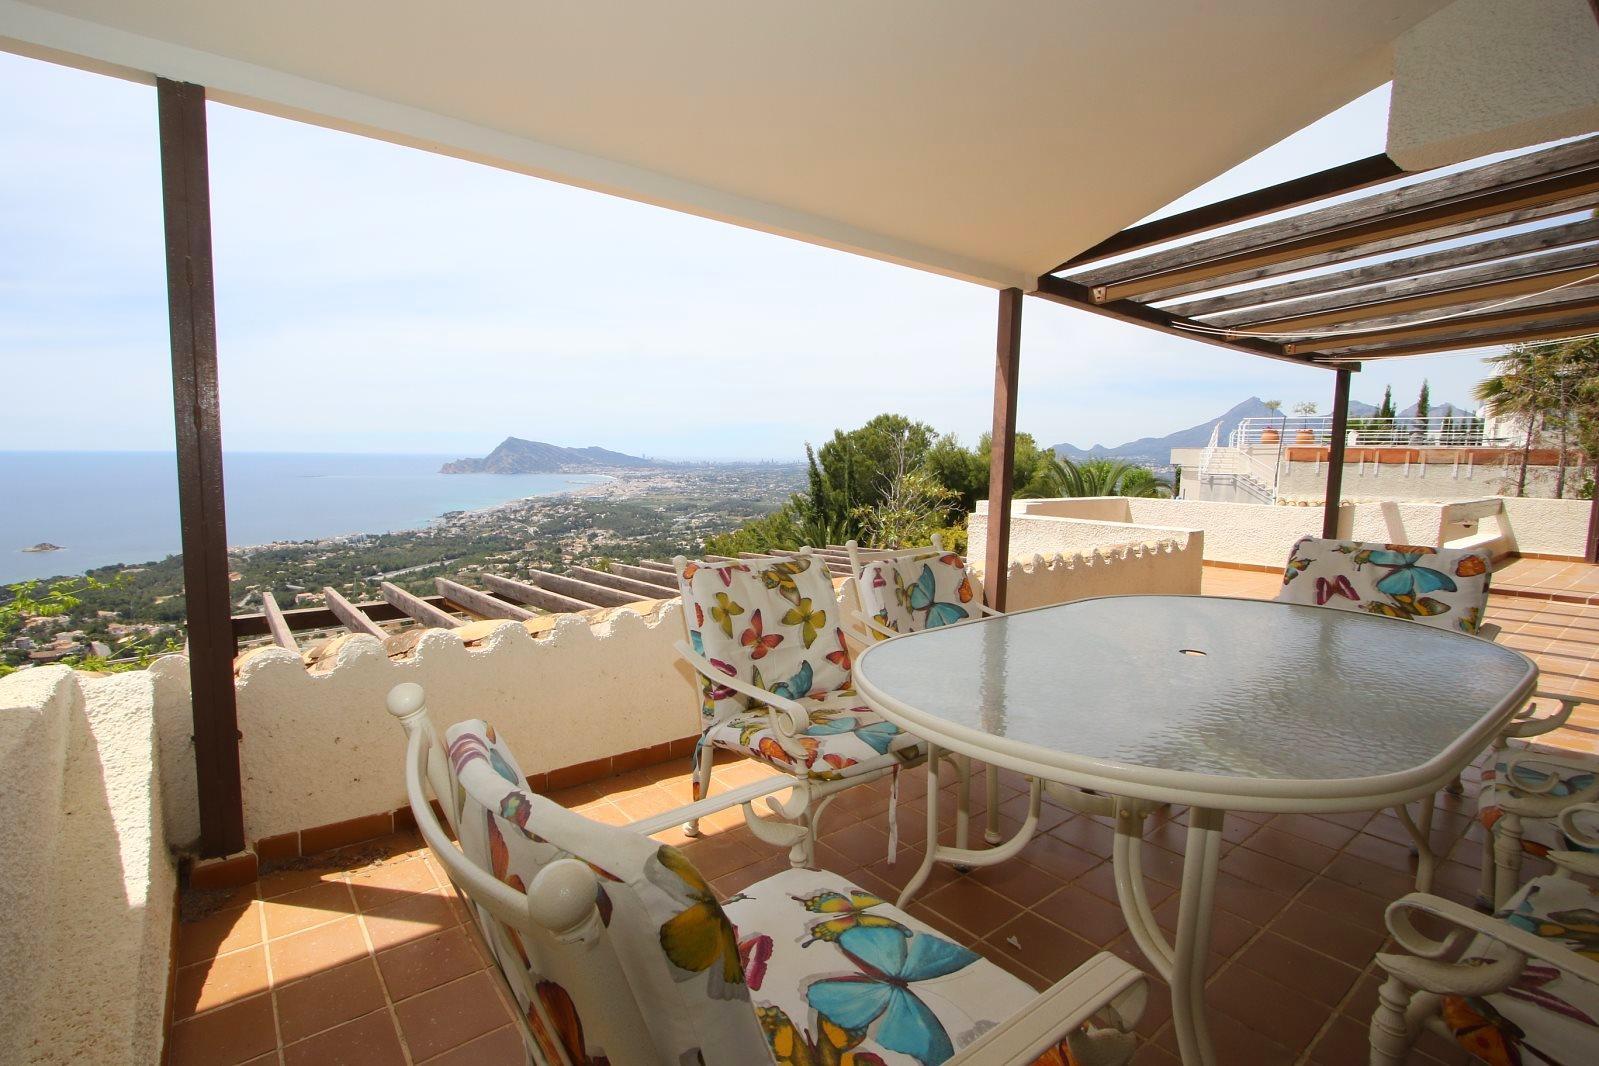 Villa with spectacular views over the entire bay in Altea